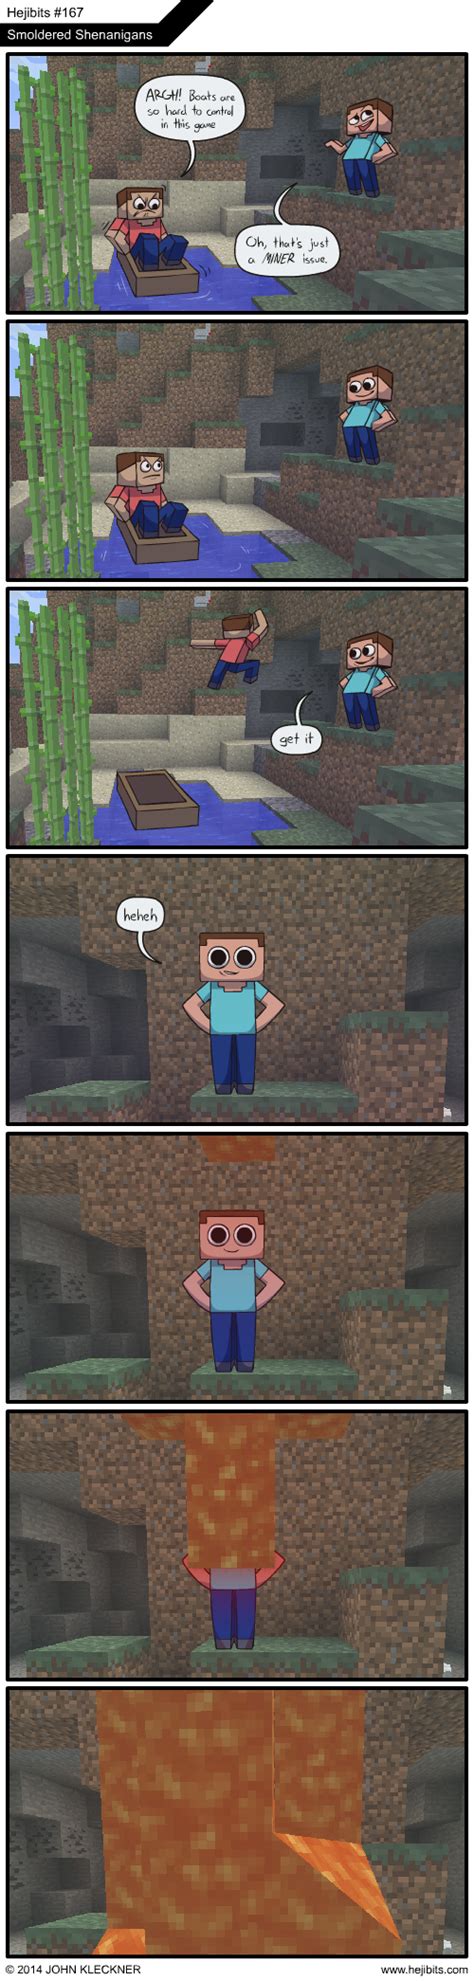 He Should Have Mined His Own Business Minecraft Minecraft Jokes